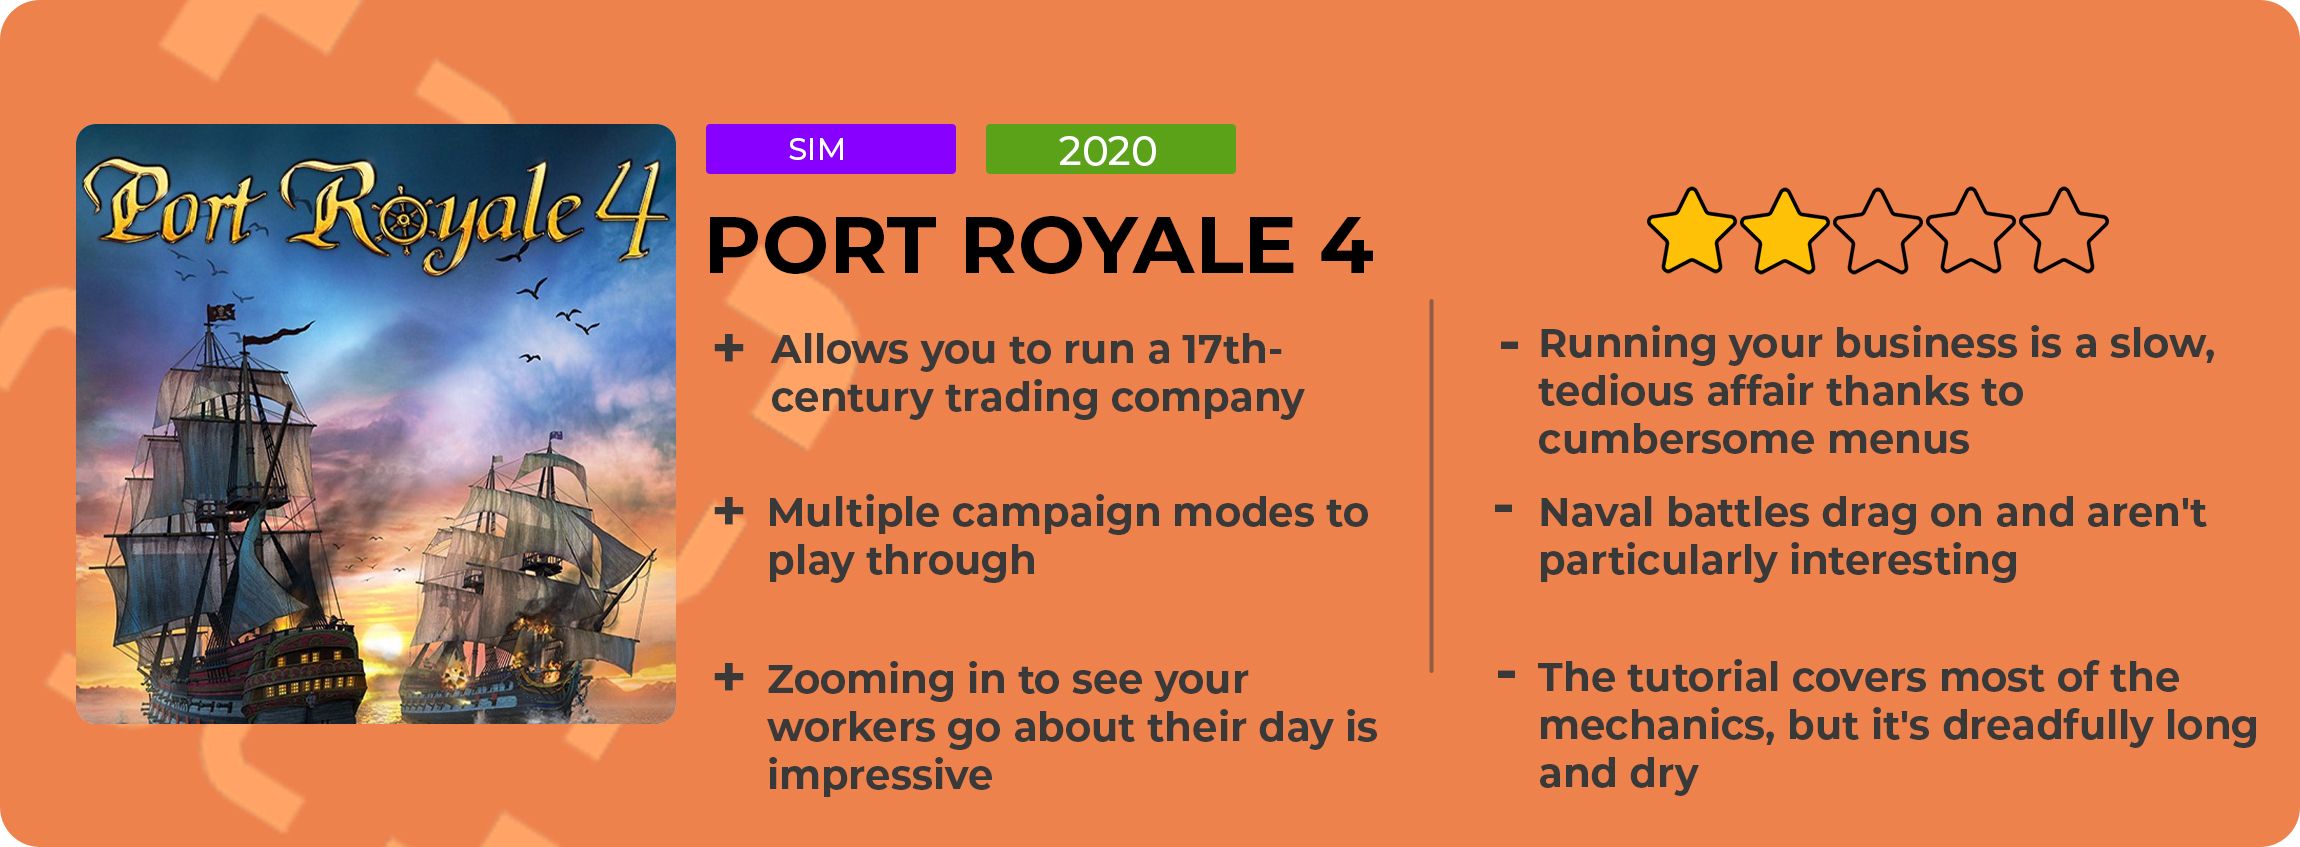 port royale 4 switch review